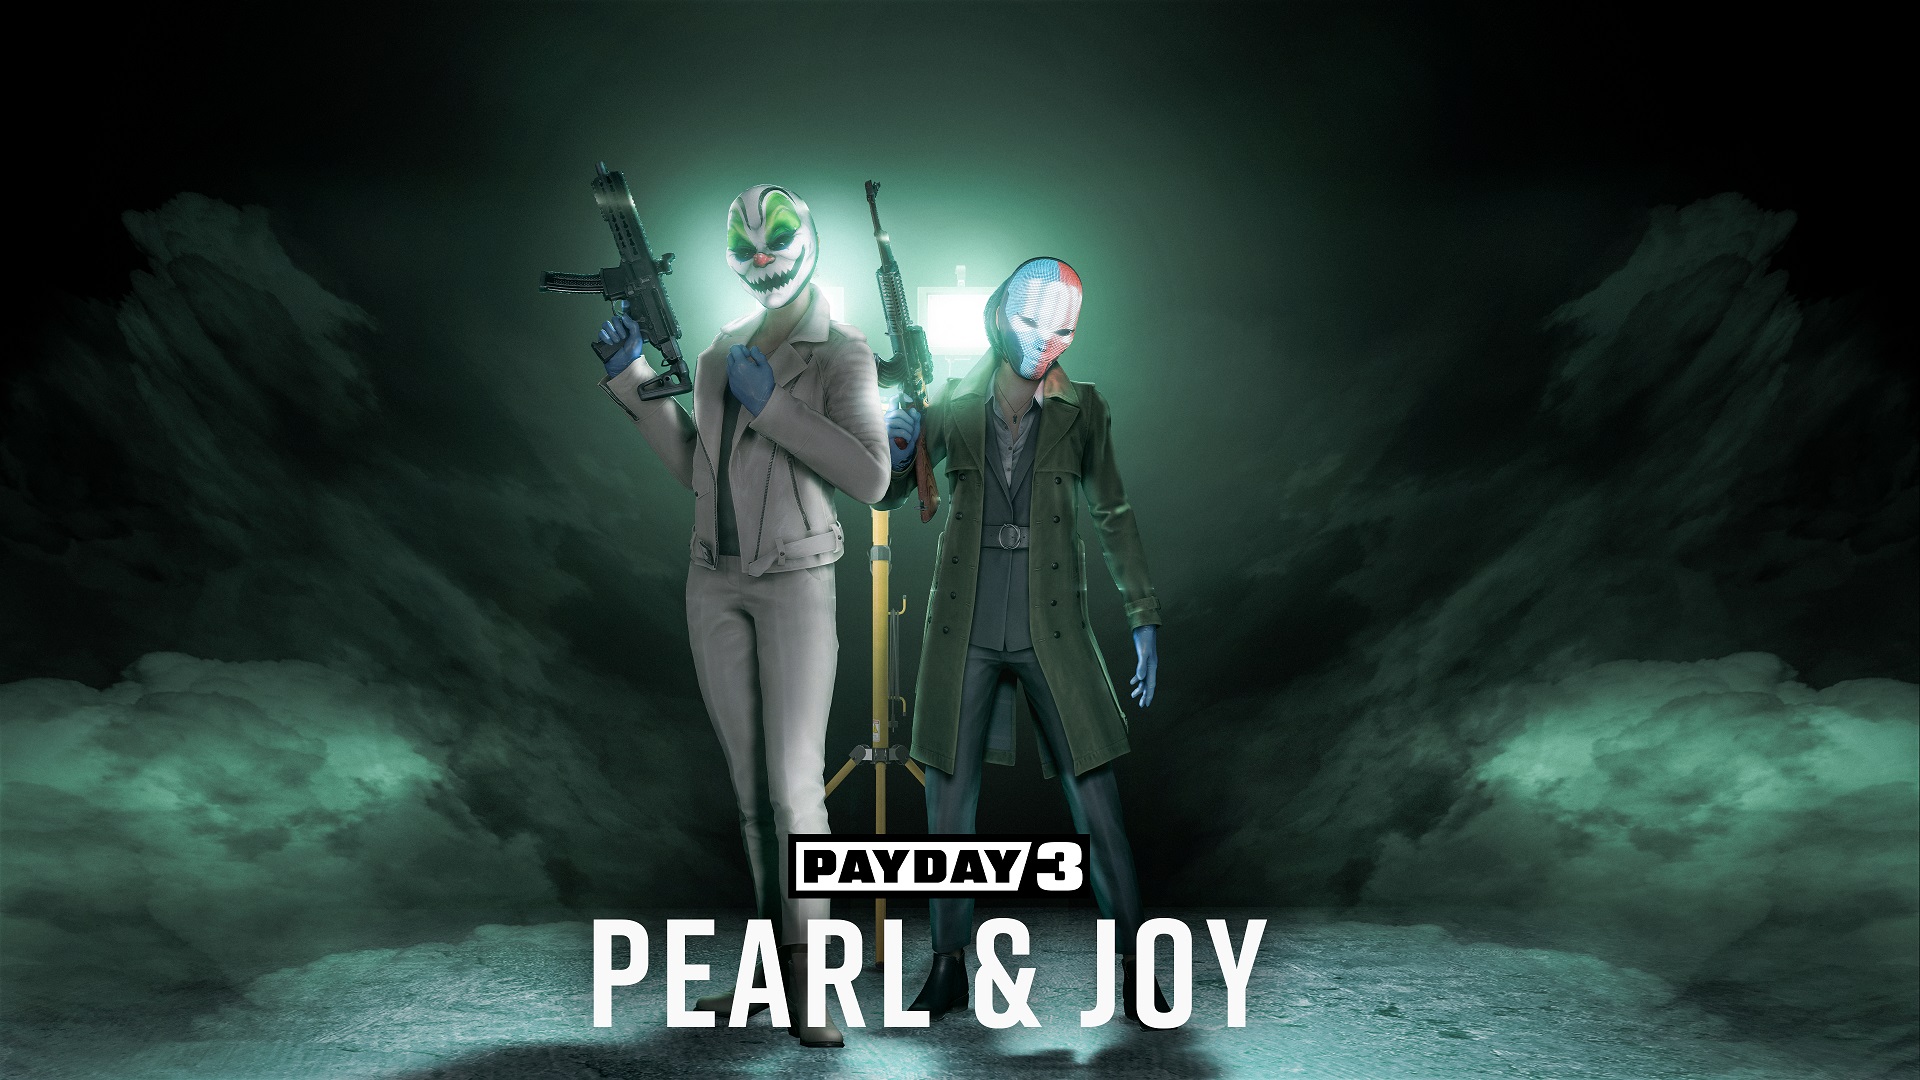 Payday 3 Account Creation, Development, Setting, Trailer and More - News